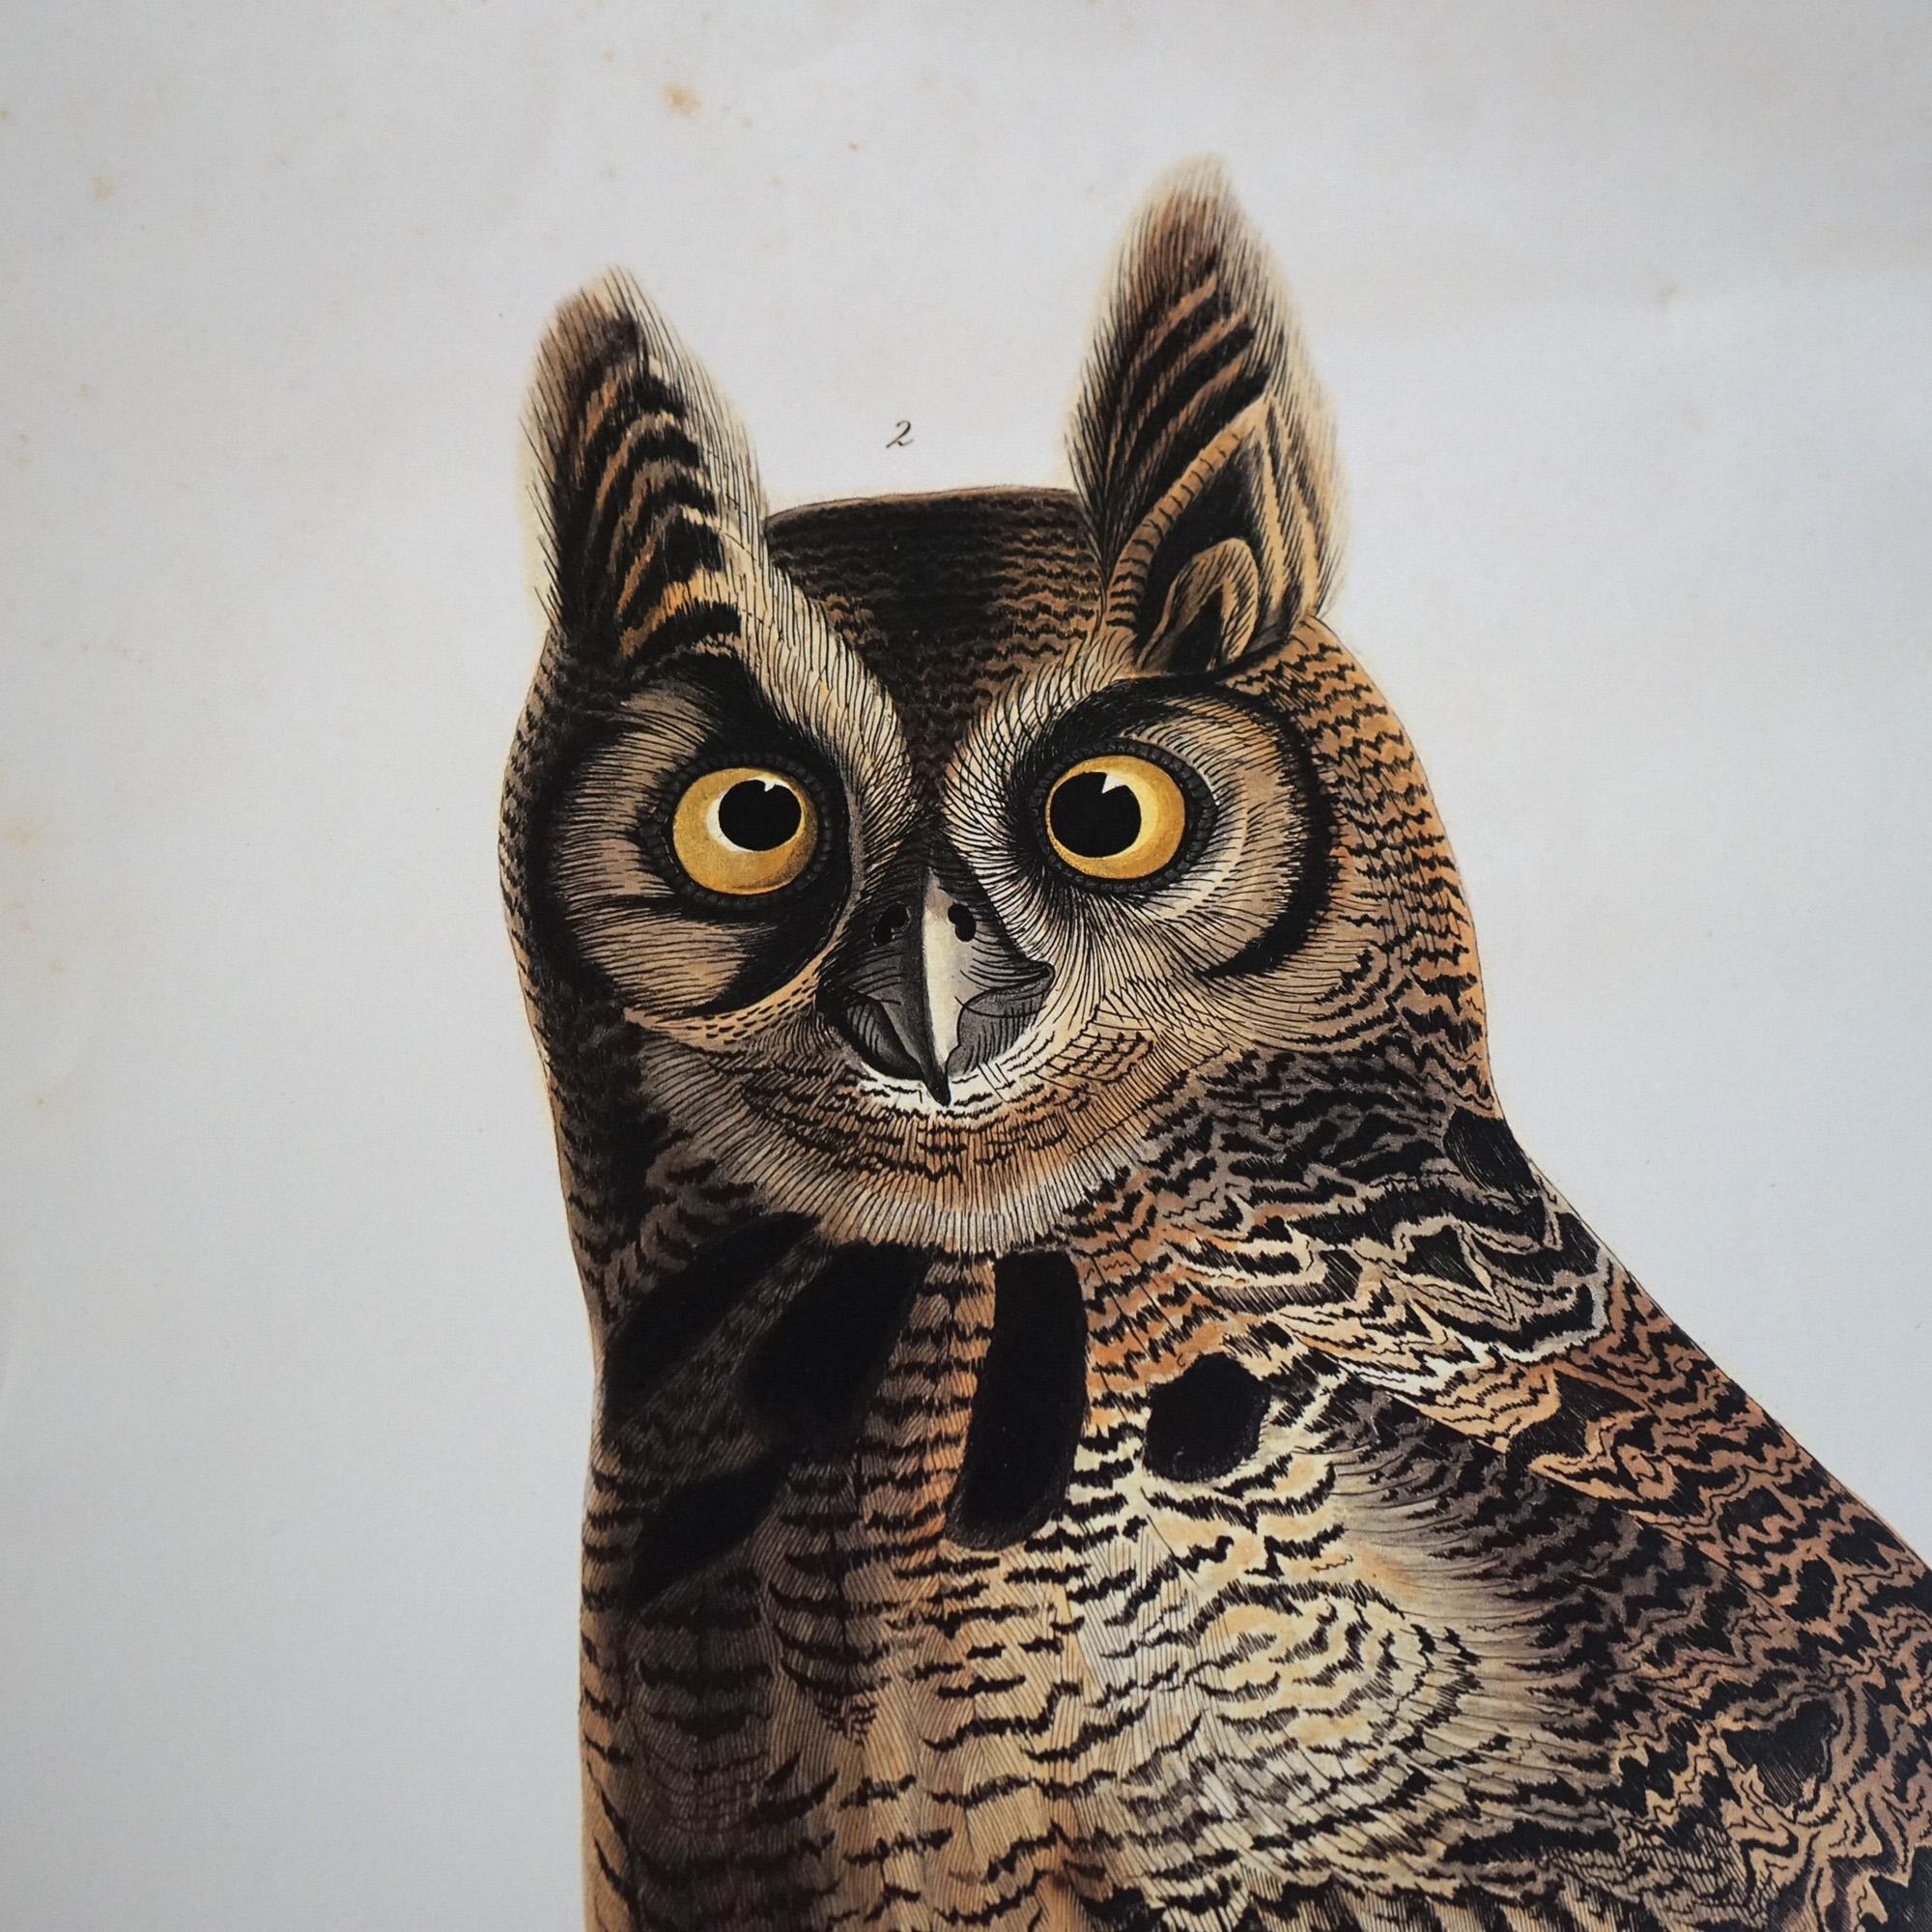 R. Havell Double Elephant Folio Audubon Print of Great Horned Owls C1999

Measures- 35''H x 23''W x .25''D